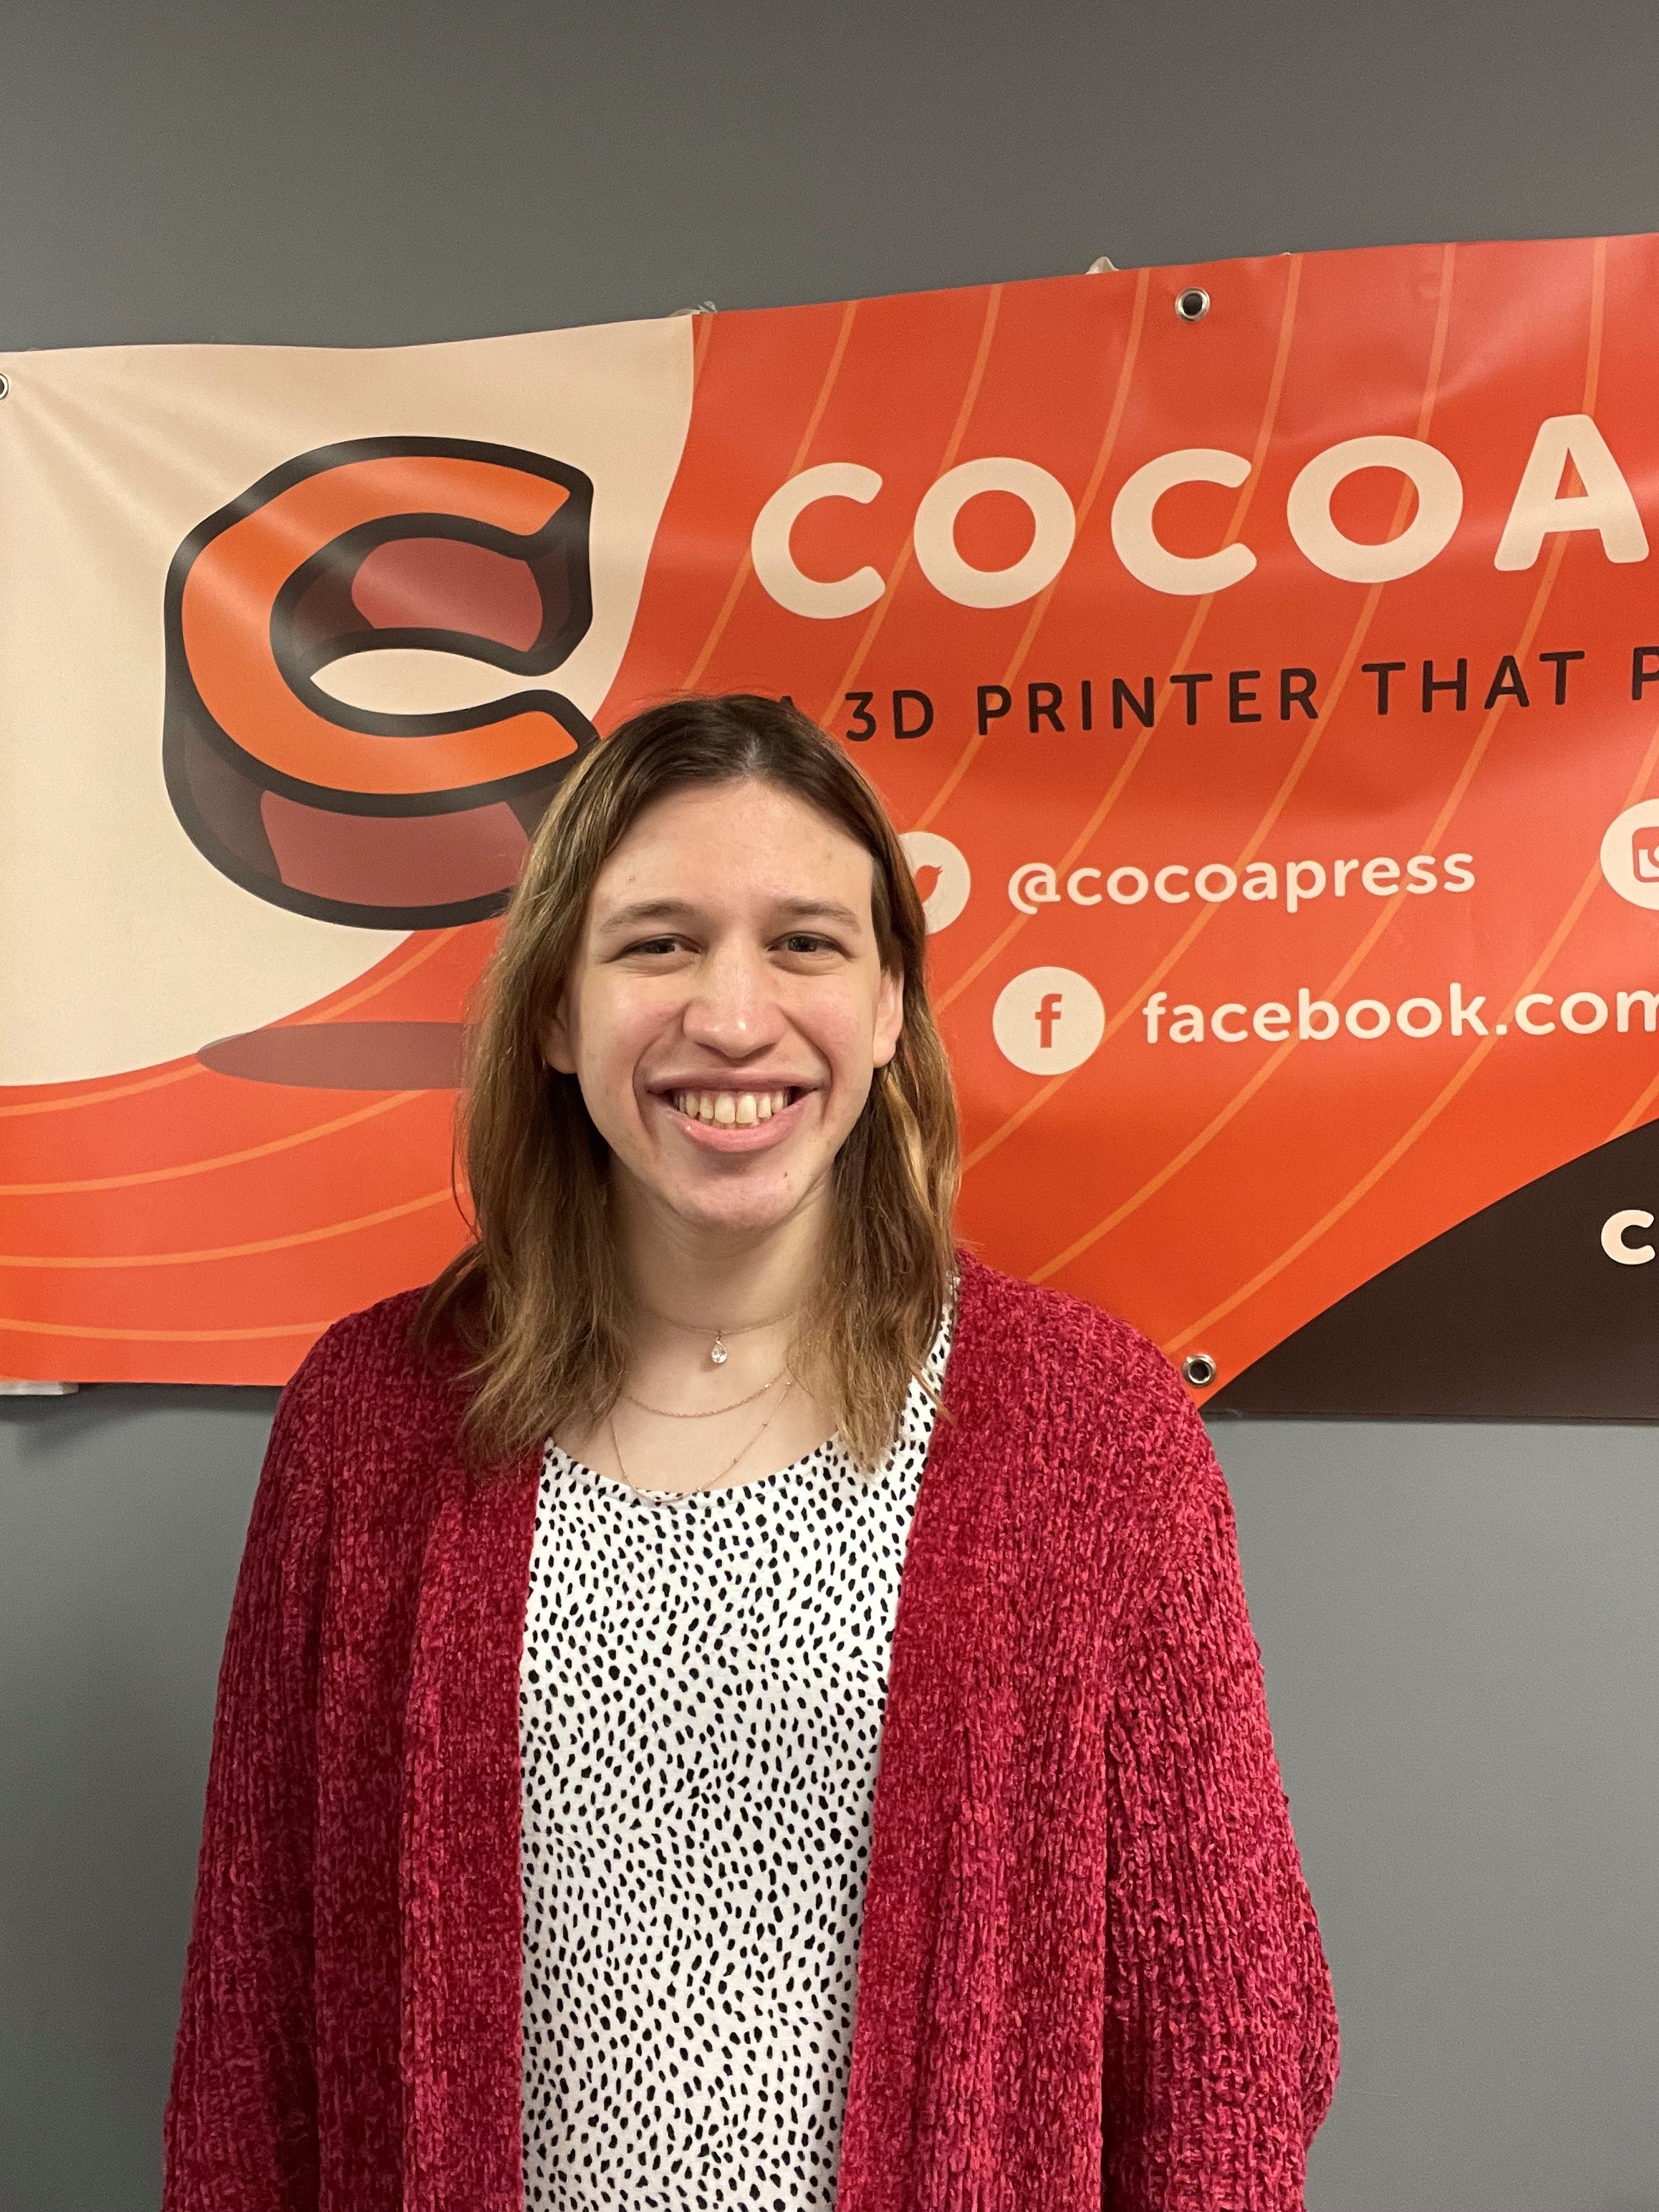 Cocoa Press Founder standing in front of Cocoa Press banner